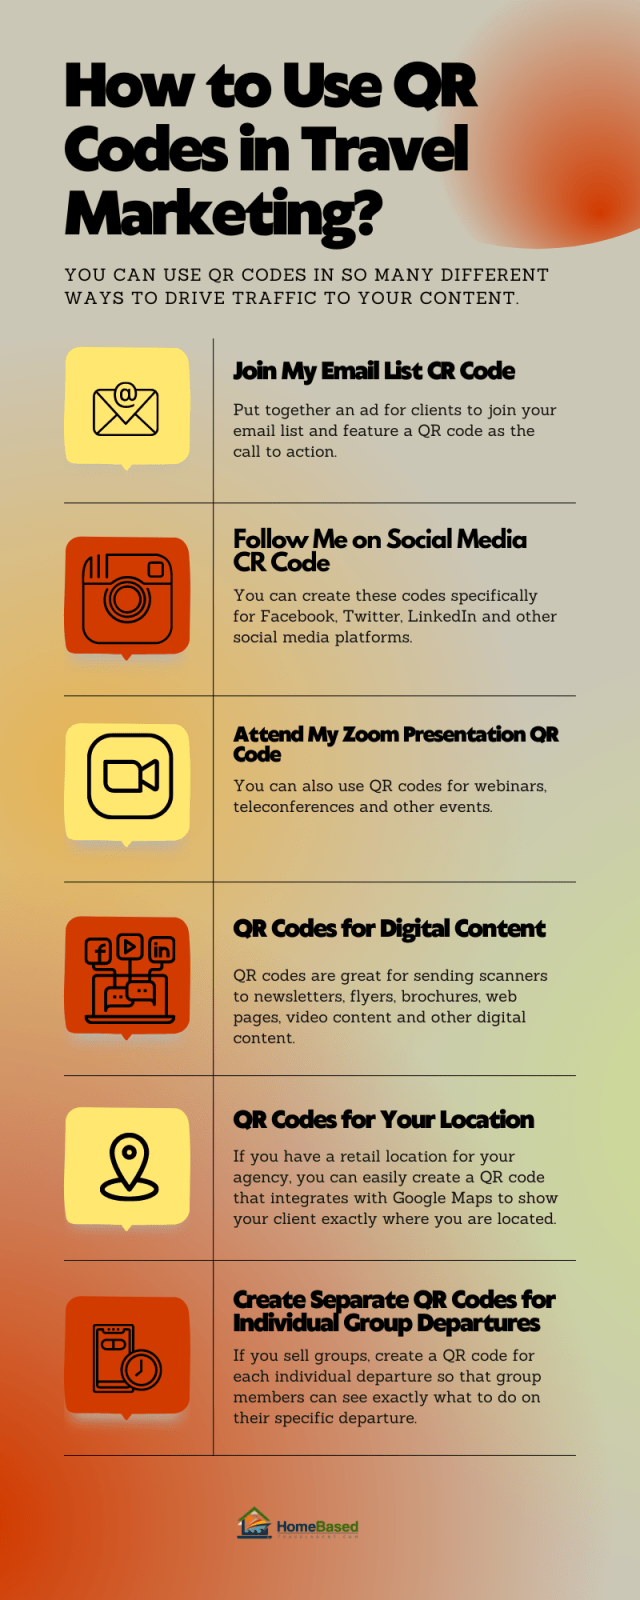 How-to-Use-QR-Codes-in-your-Travel-Agency-Marketing-Infographic-HBTA